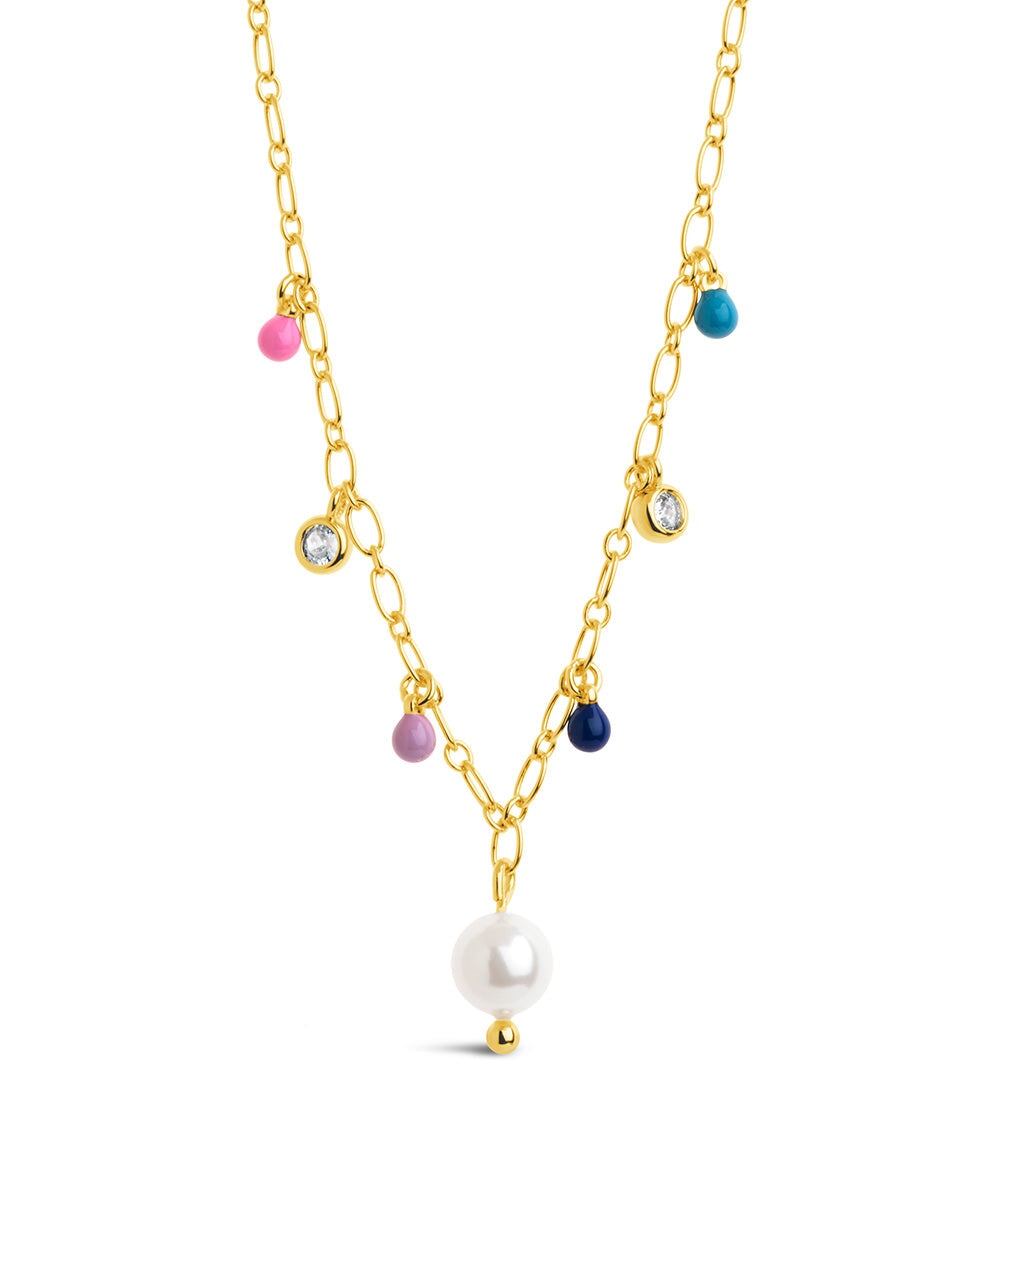 Enamel, Pearl, & CZ Charm Necklace Necklace Sterling Forever 